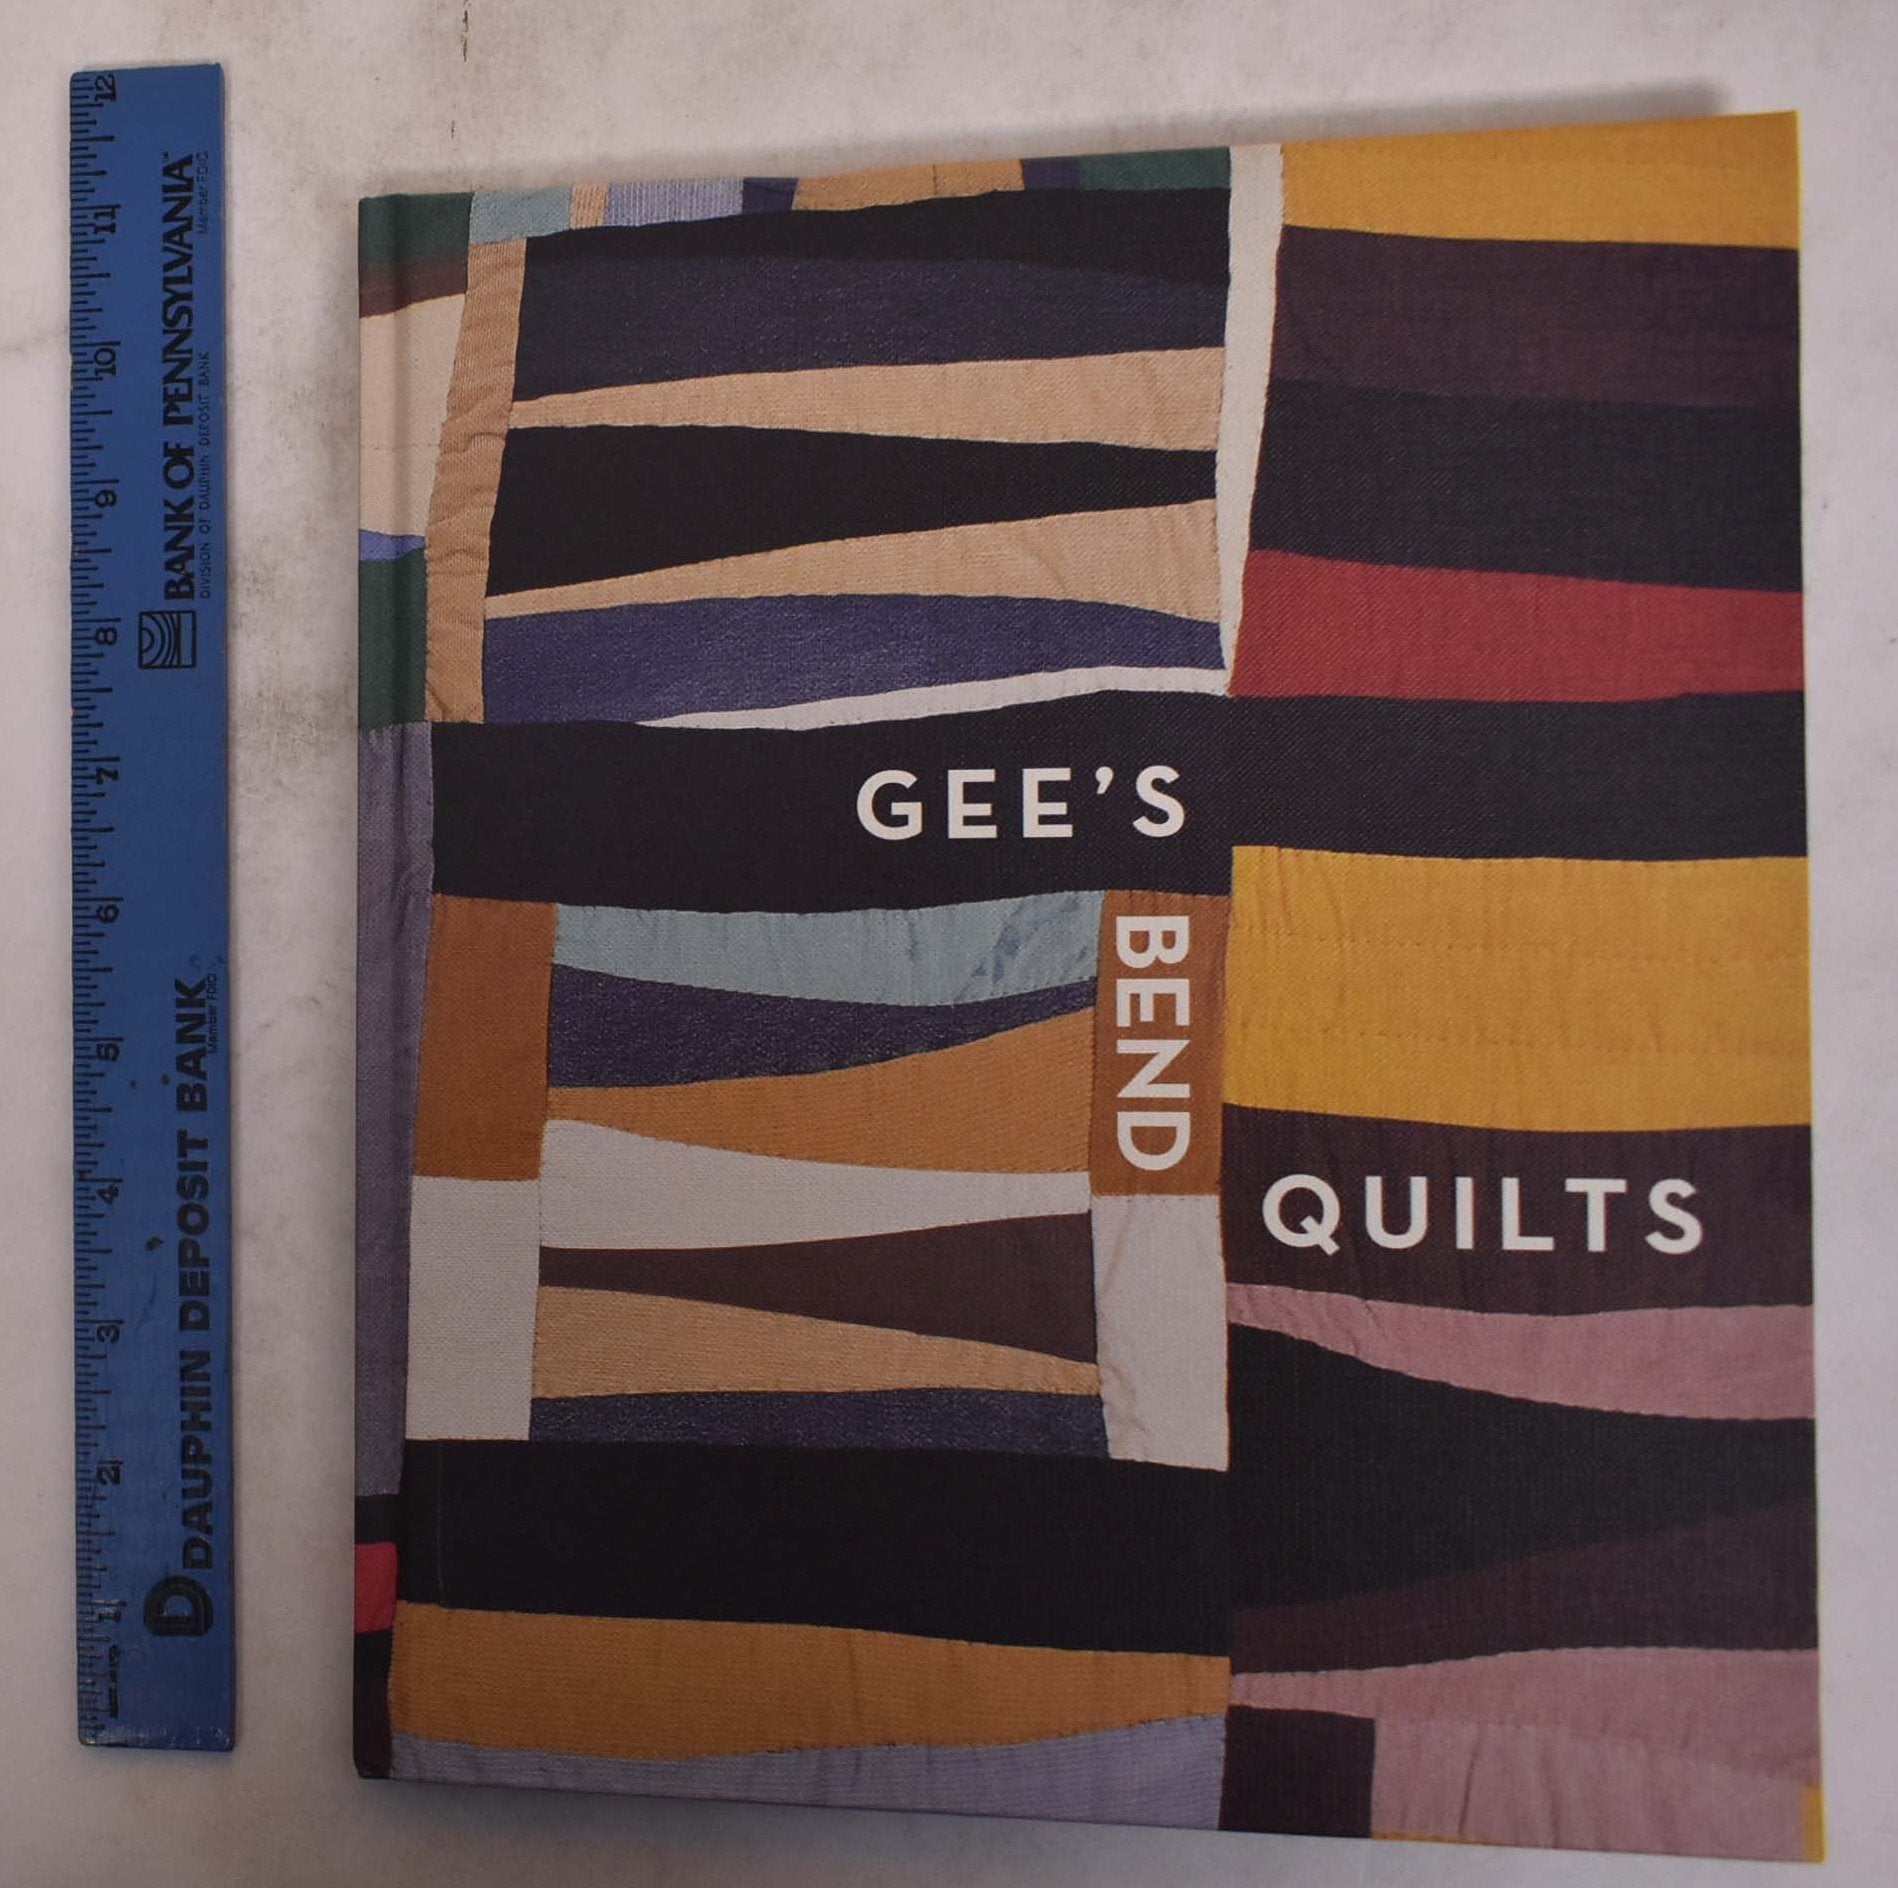 Quilts of Gee's Bend Notes [Book]